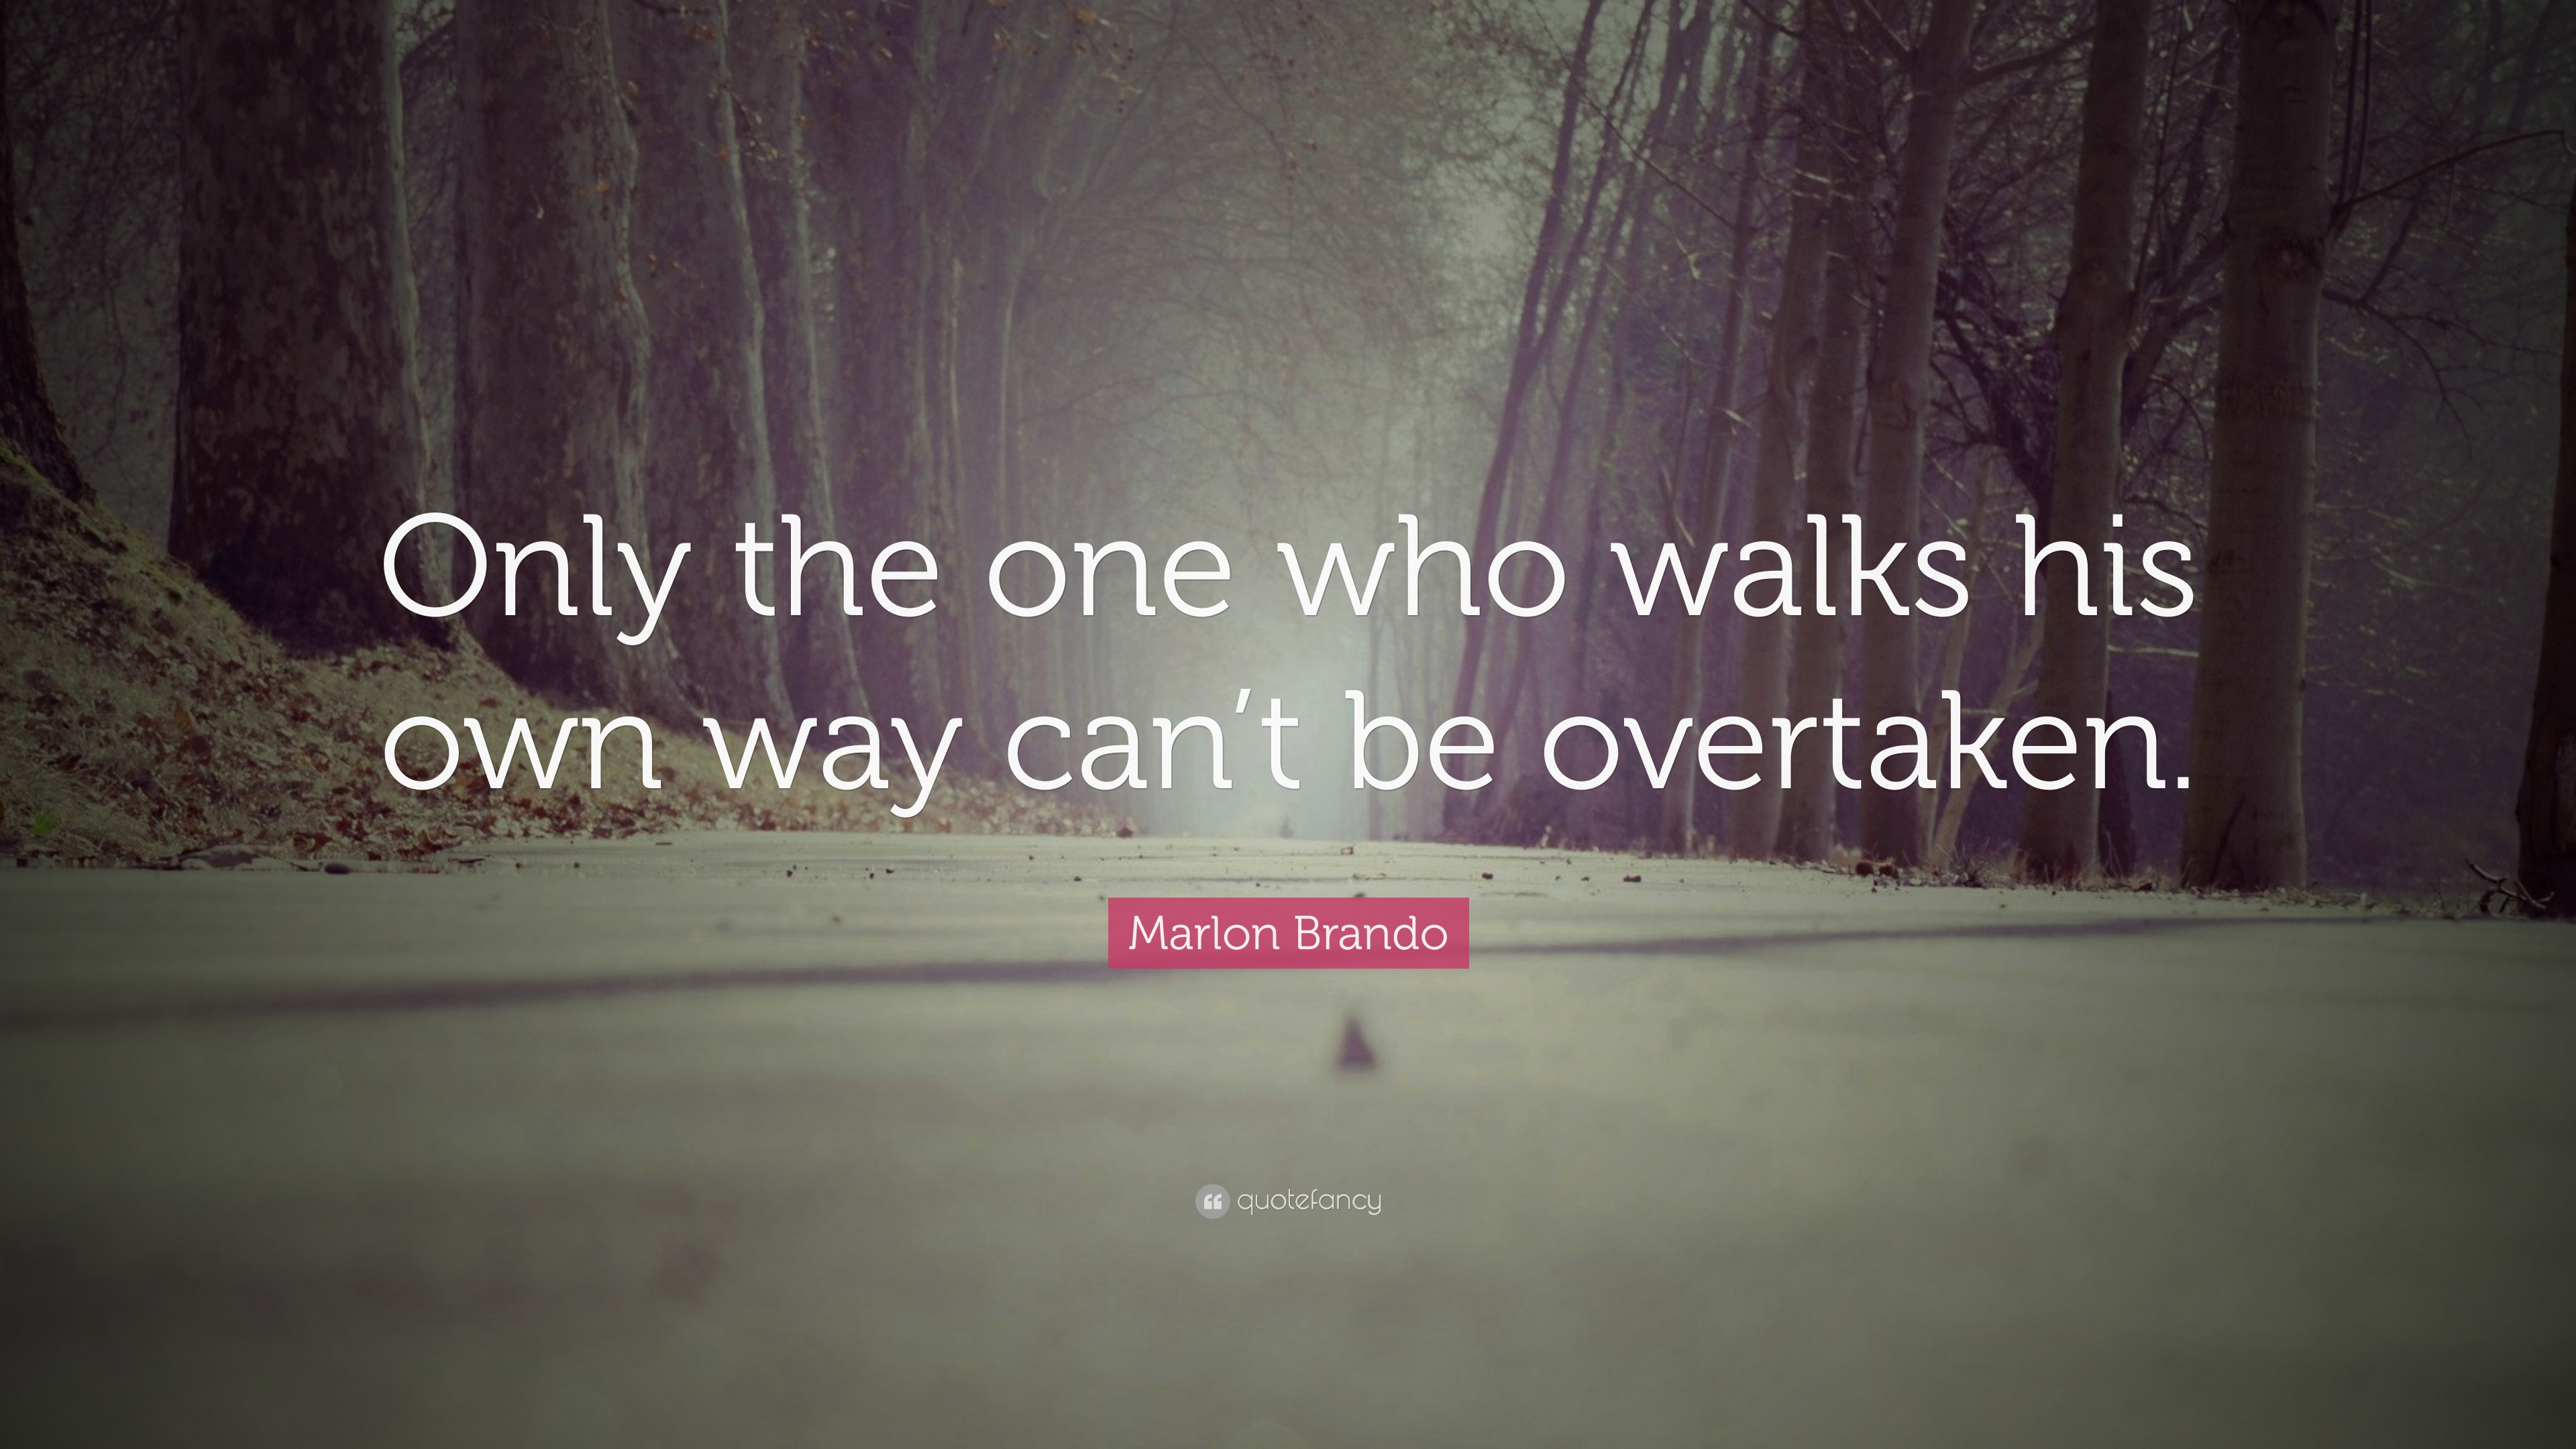 Only the one who walks his own way can’t be overtaken. 